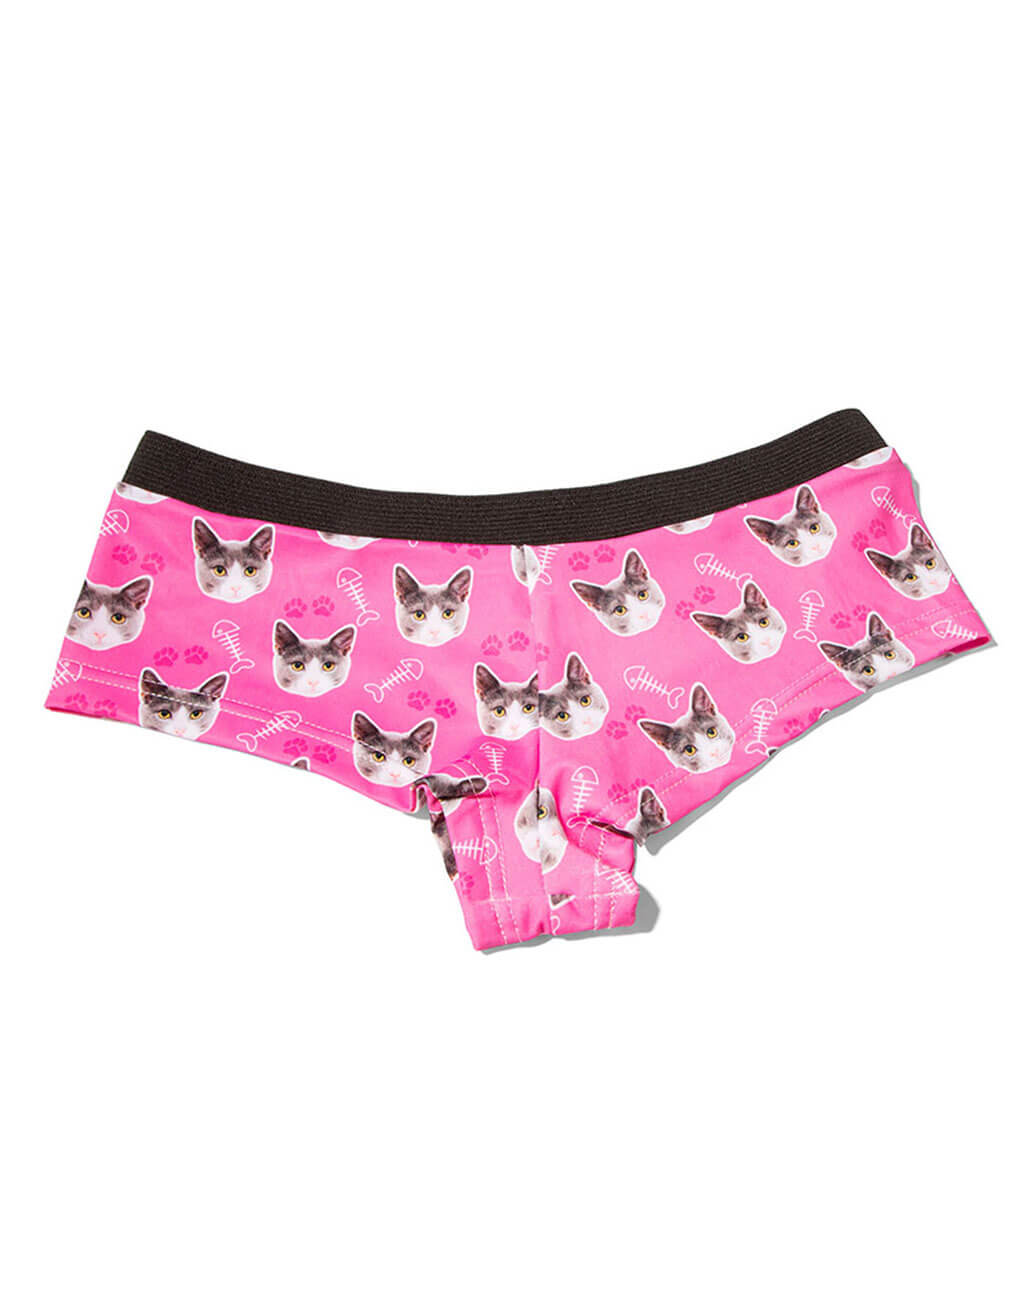 Your Cat Knickers